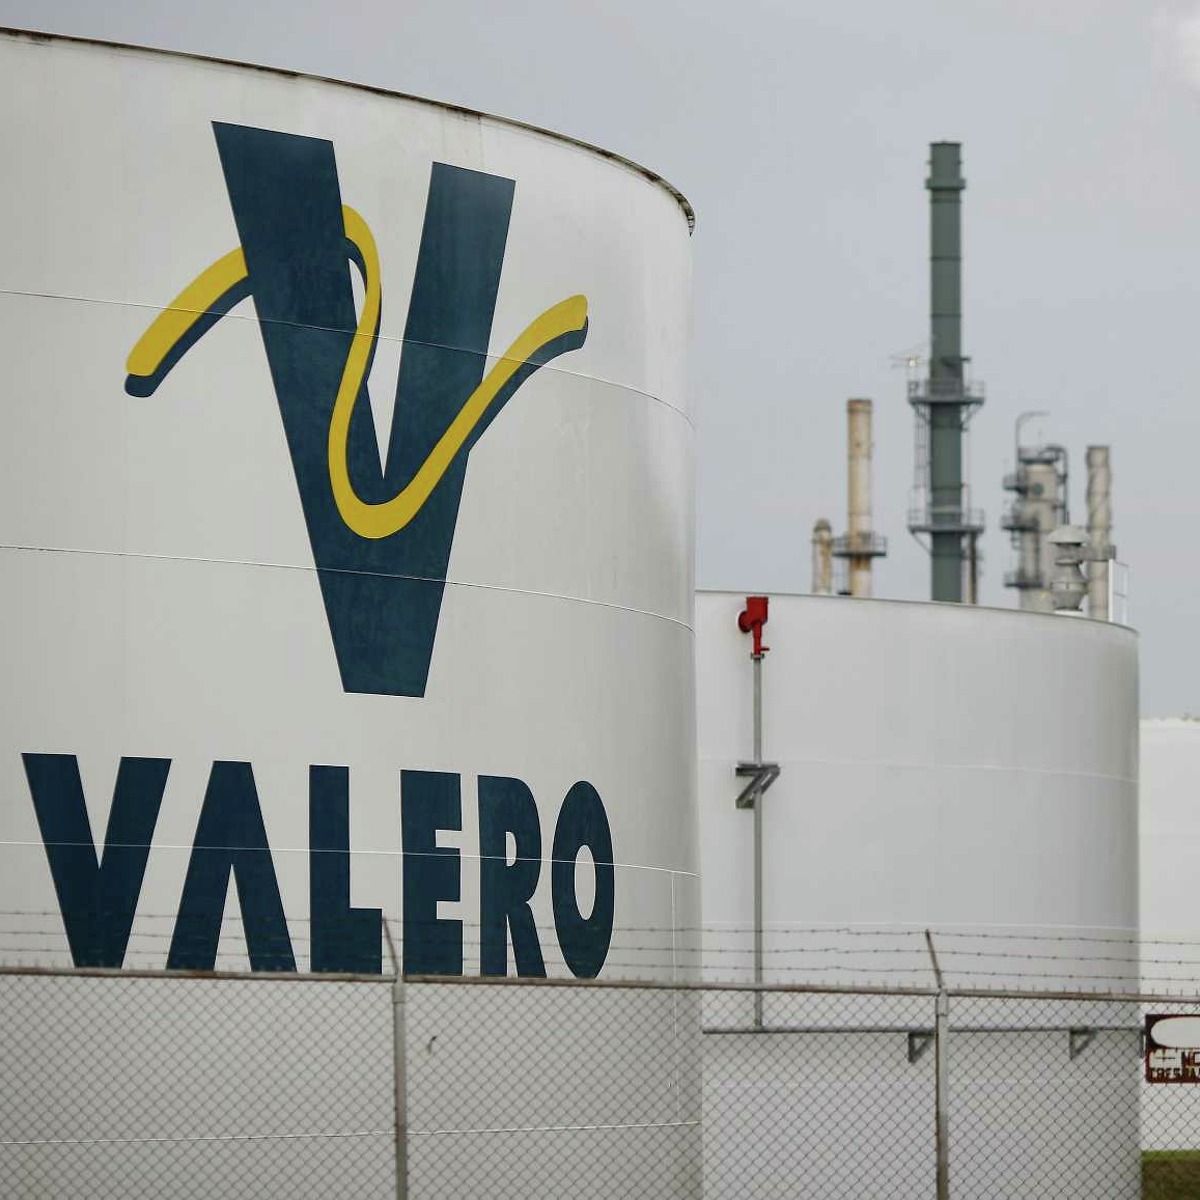 Valero will work with Galena Park residents to address property damage caused by an oil leak at its Houston refinery on Monday.